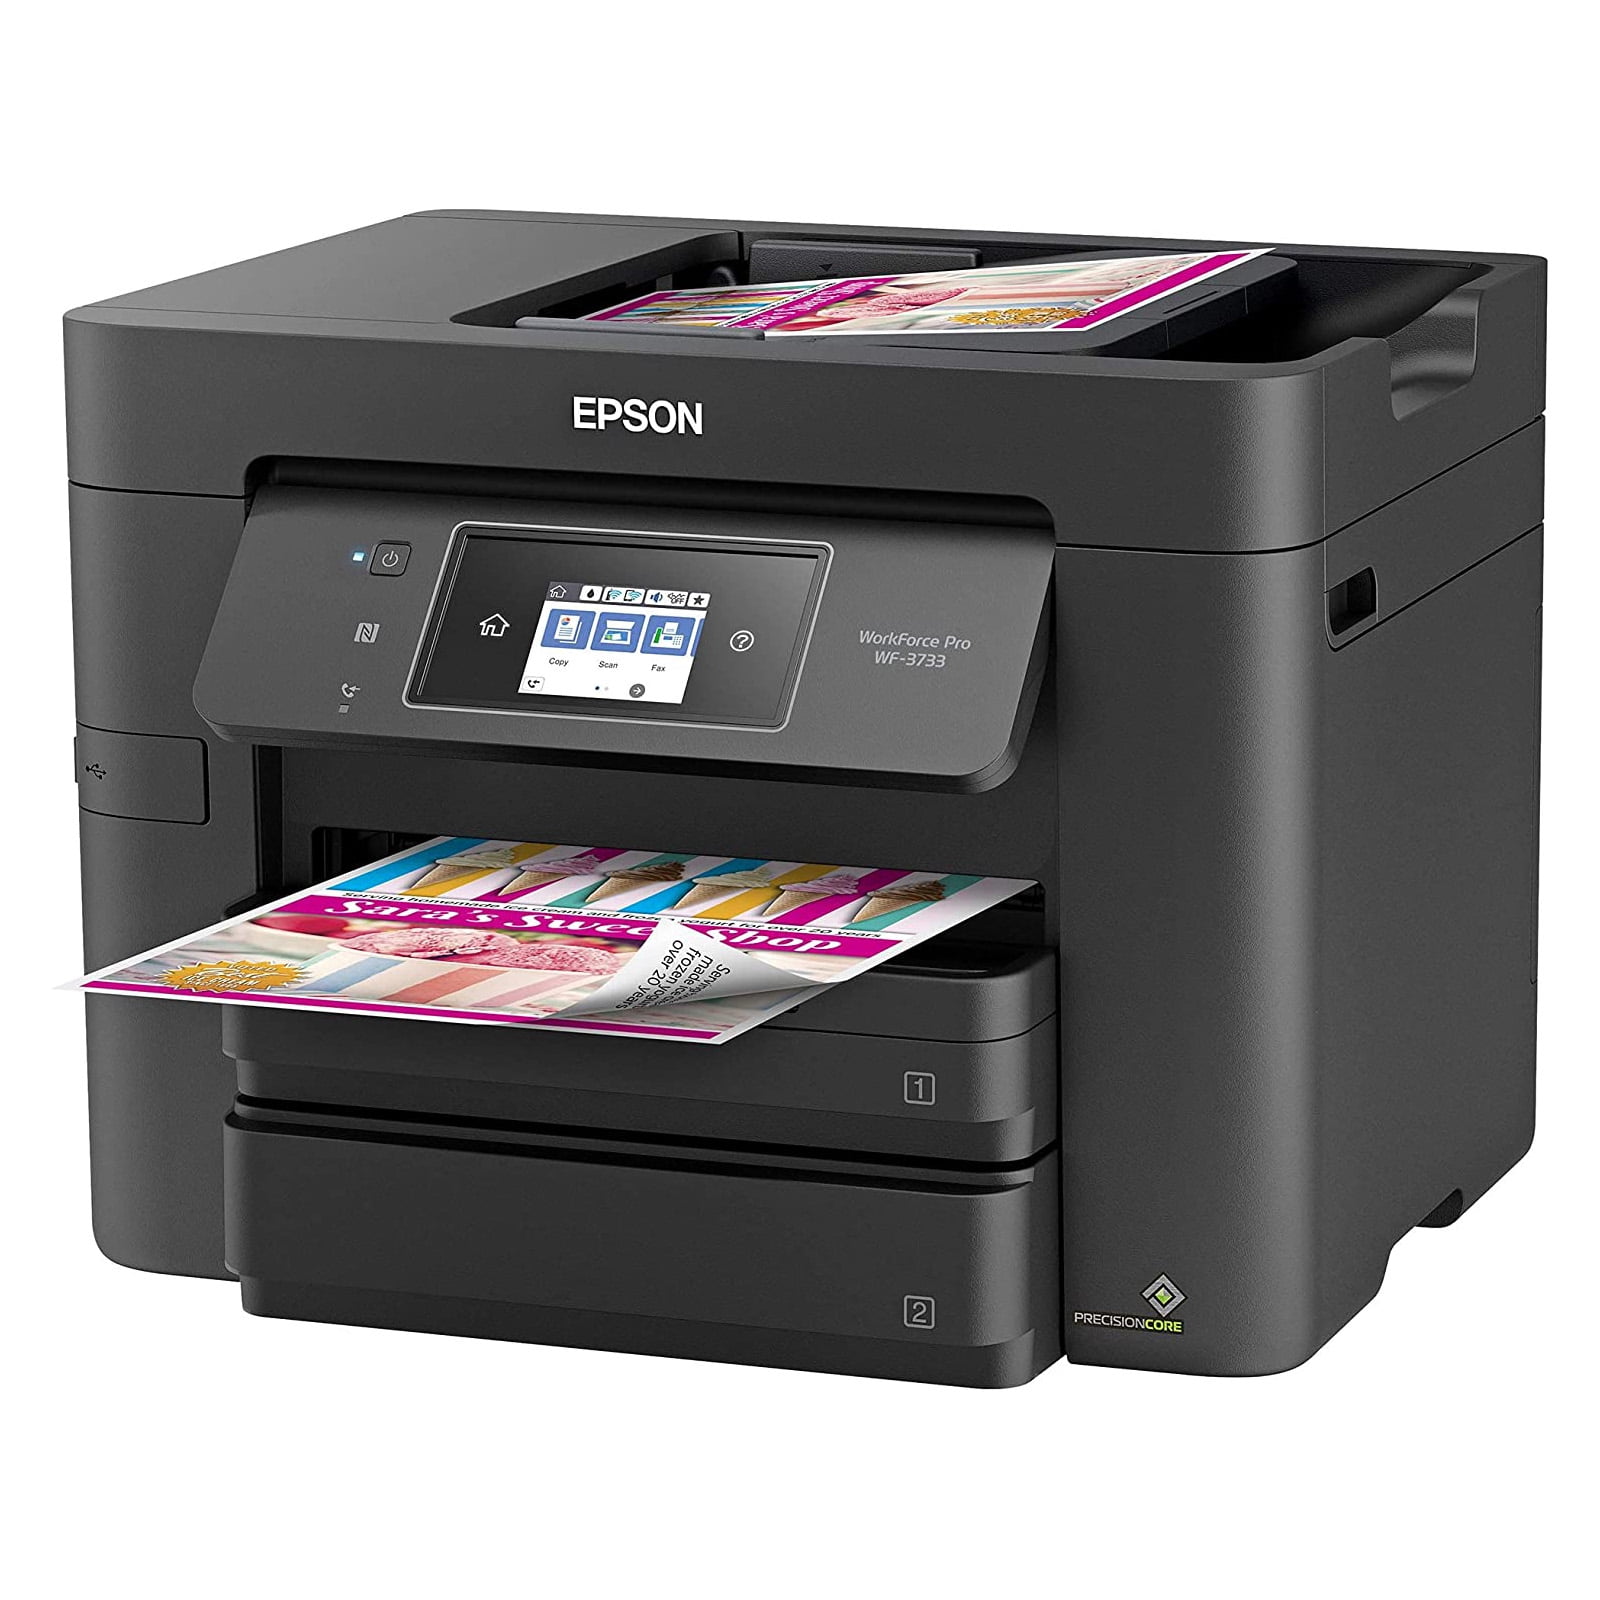 Epson Workforce Pro Wf 3733 Wireless All In One Color Inkjet Printer Home Office Printer 7701